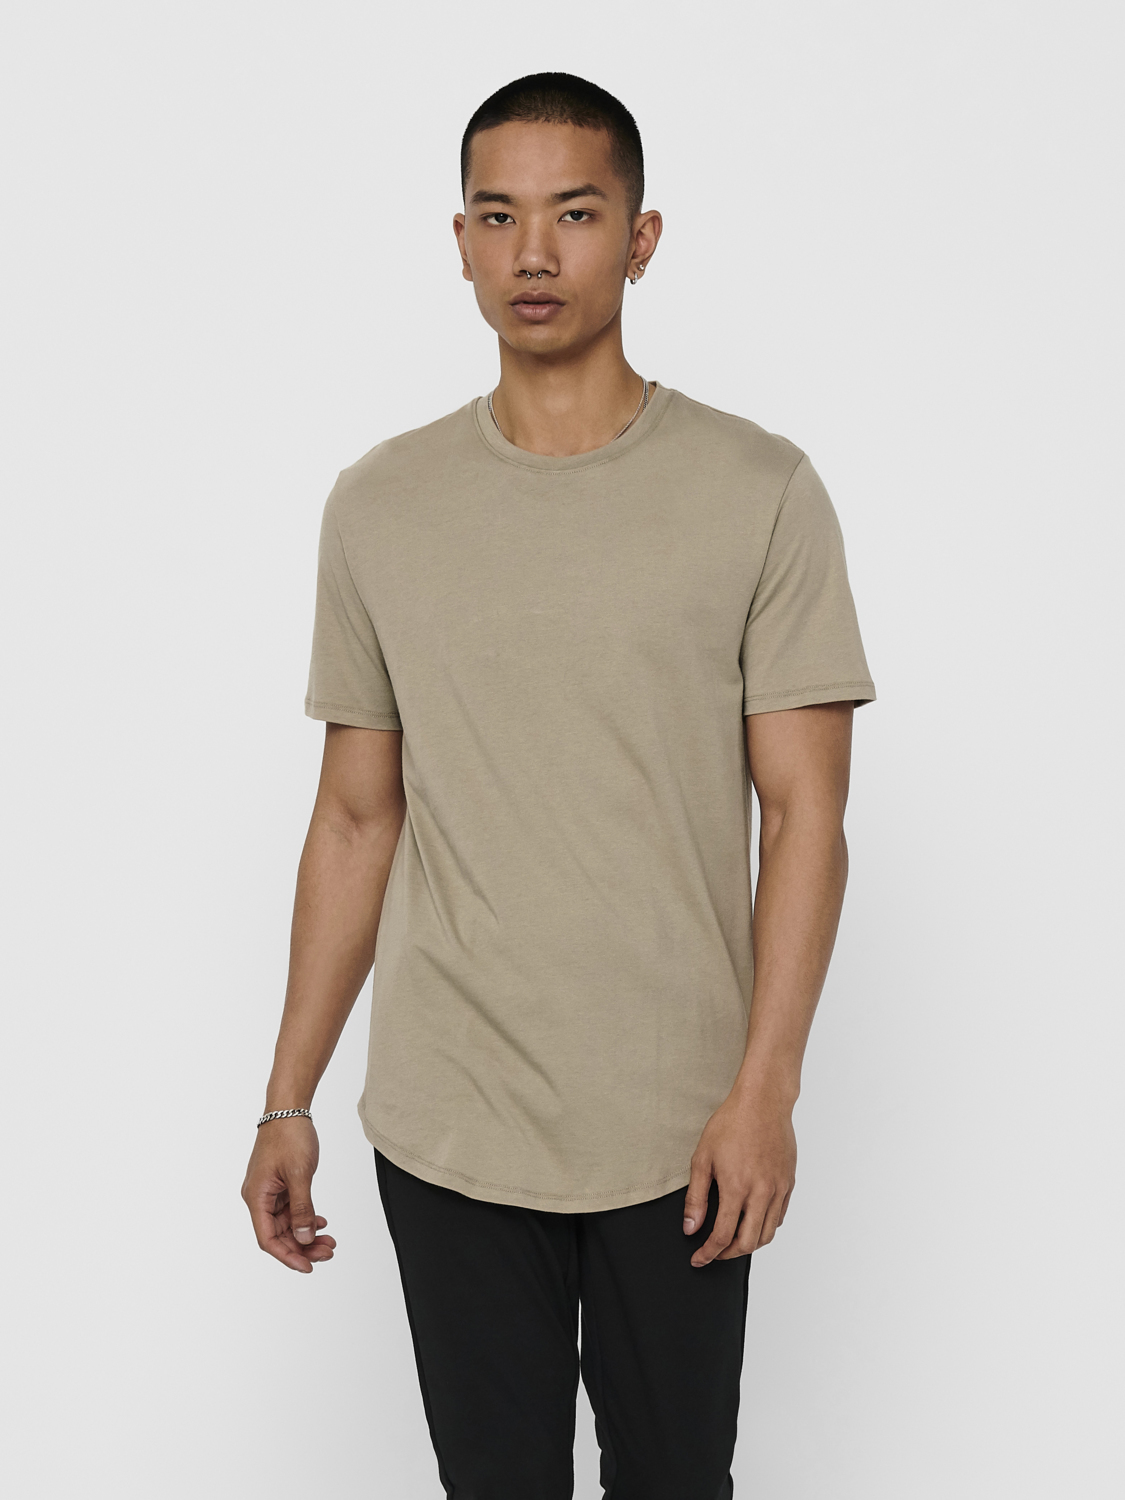 ONLY&SONS MATT LIFE LONG LINE TEE - Anthonys Fashion